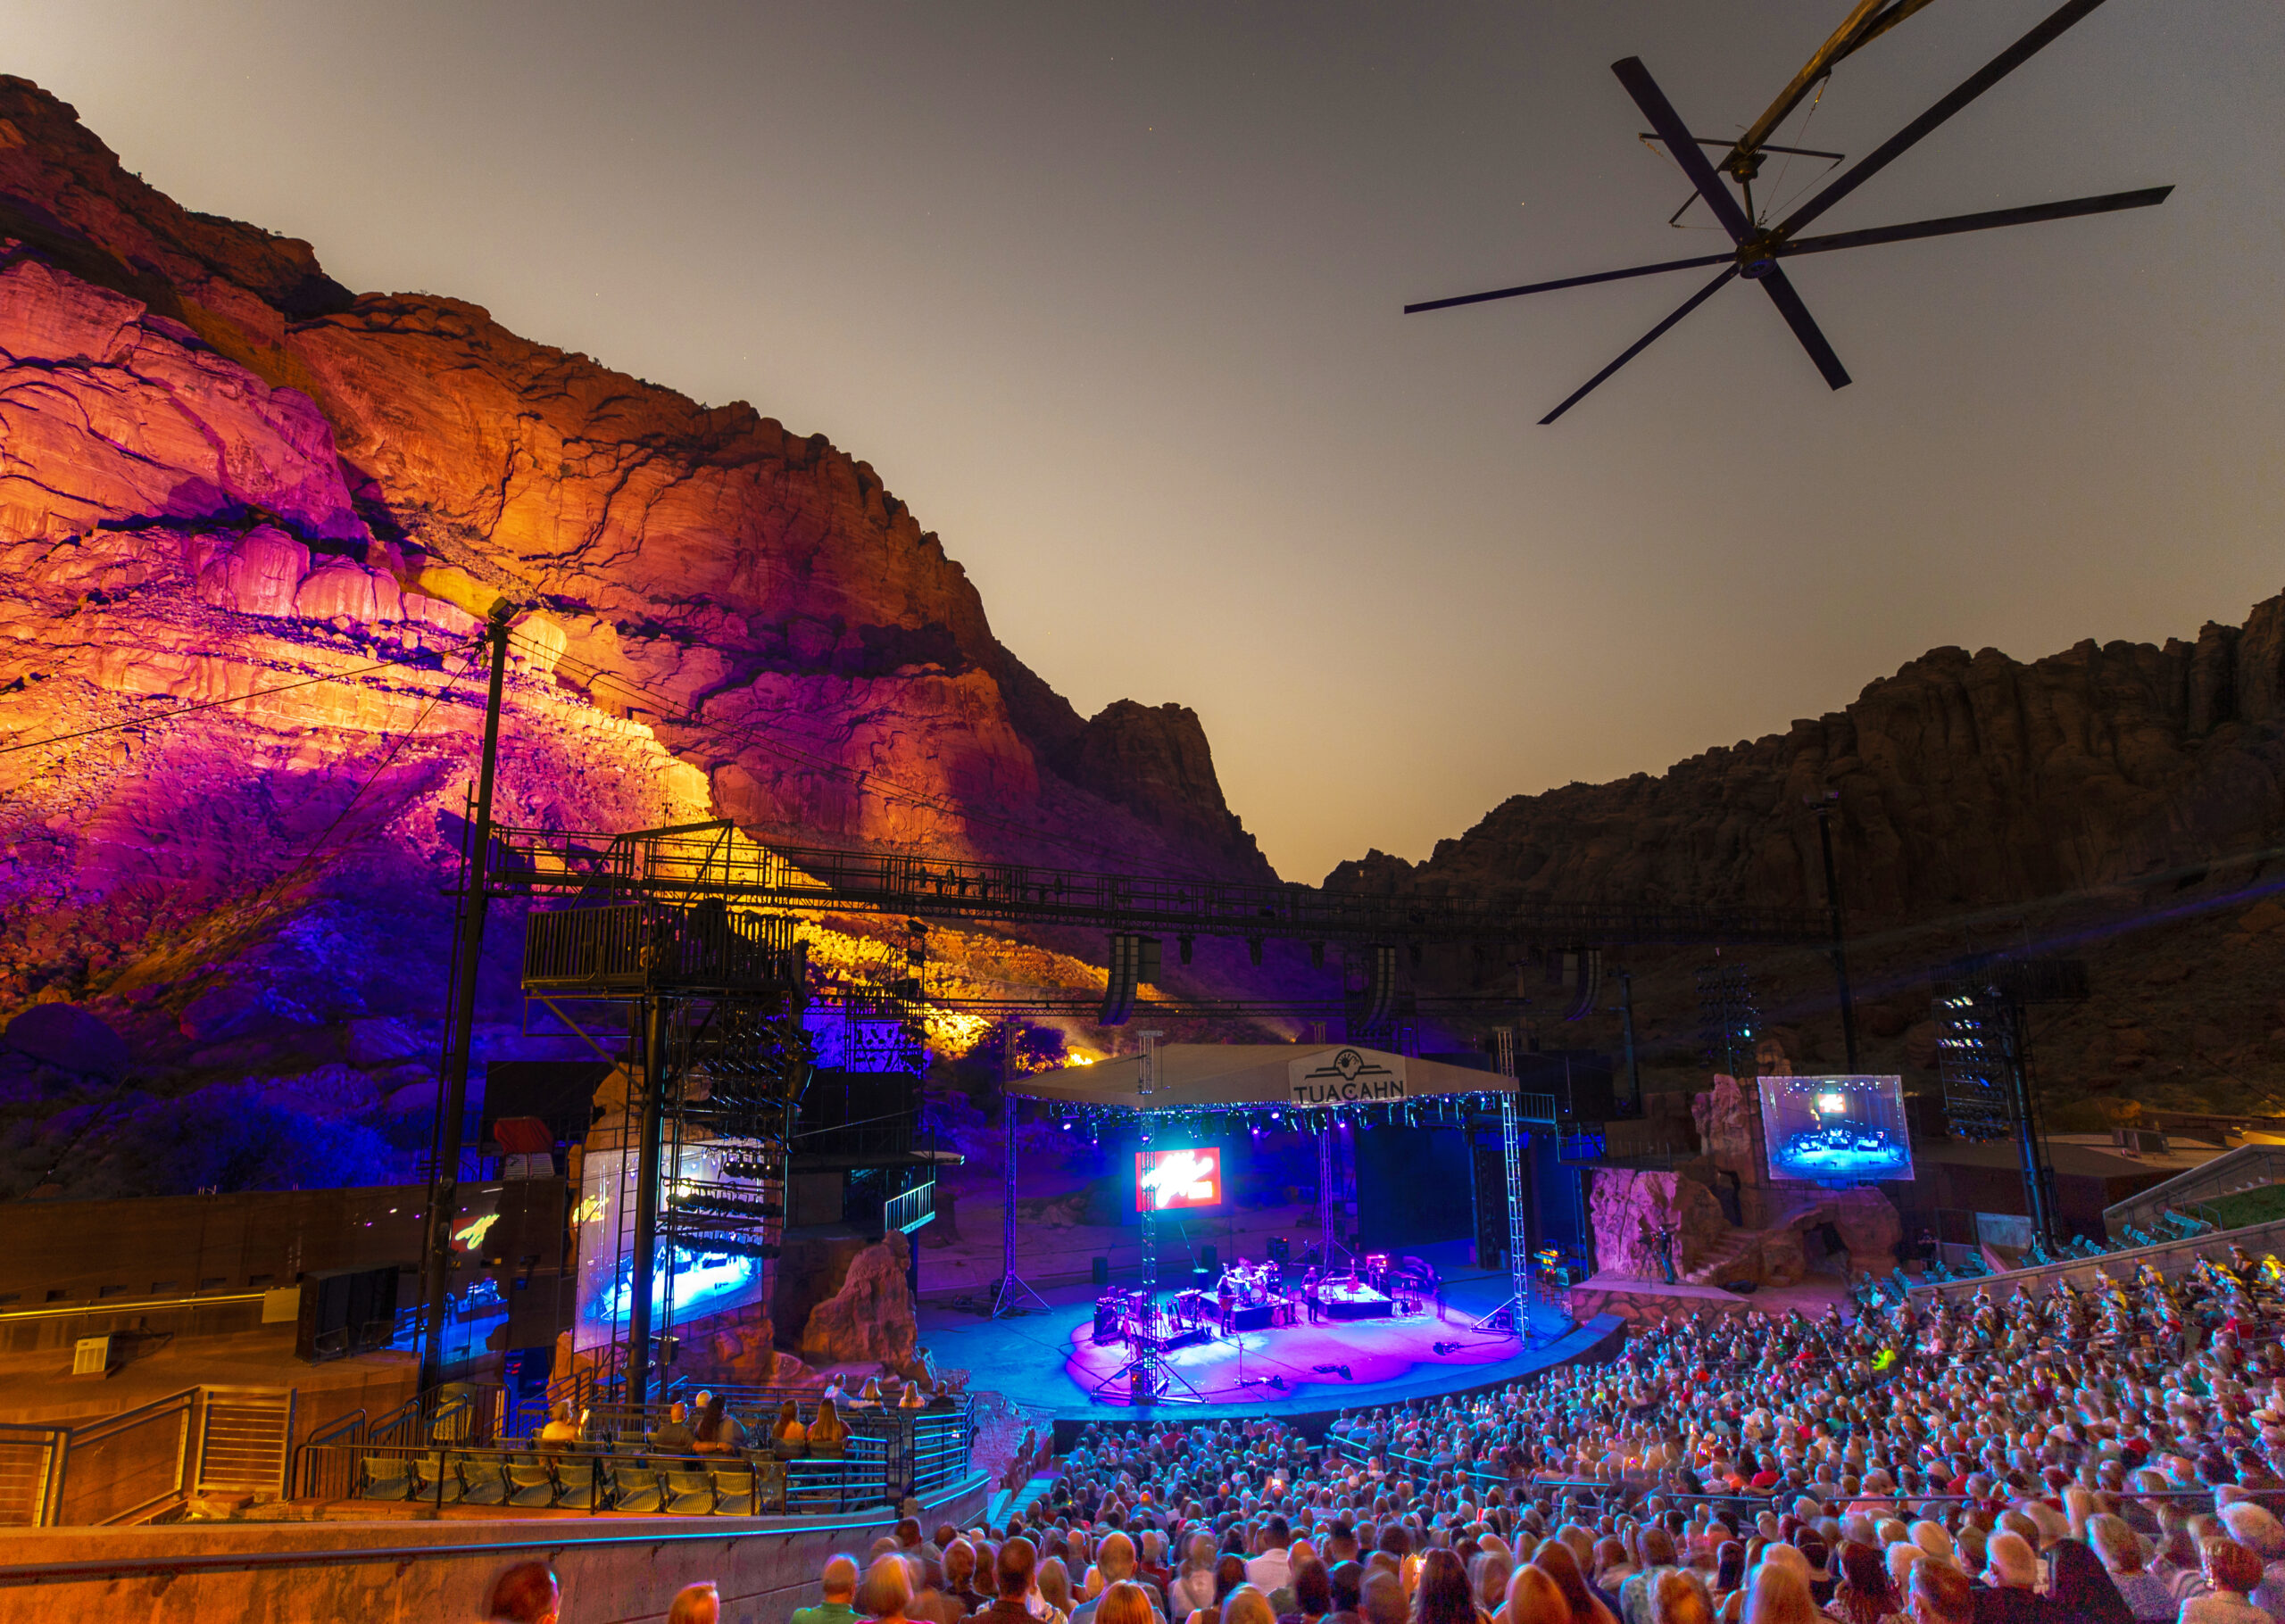 Despite millions in loss due to COVID, the show goes on at Tuacahn